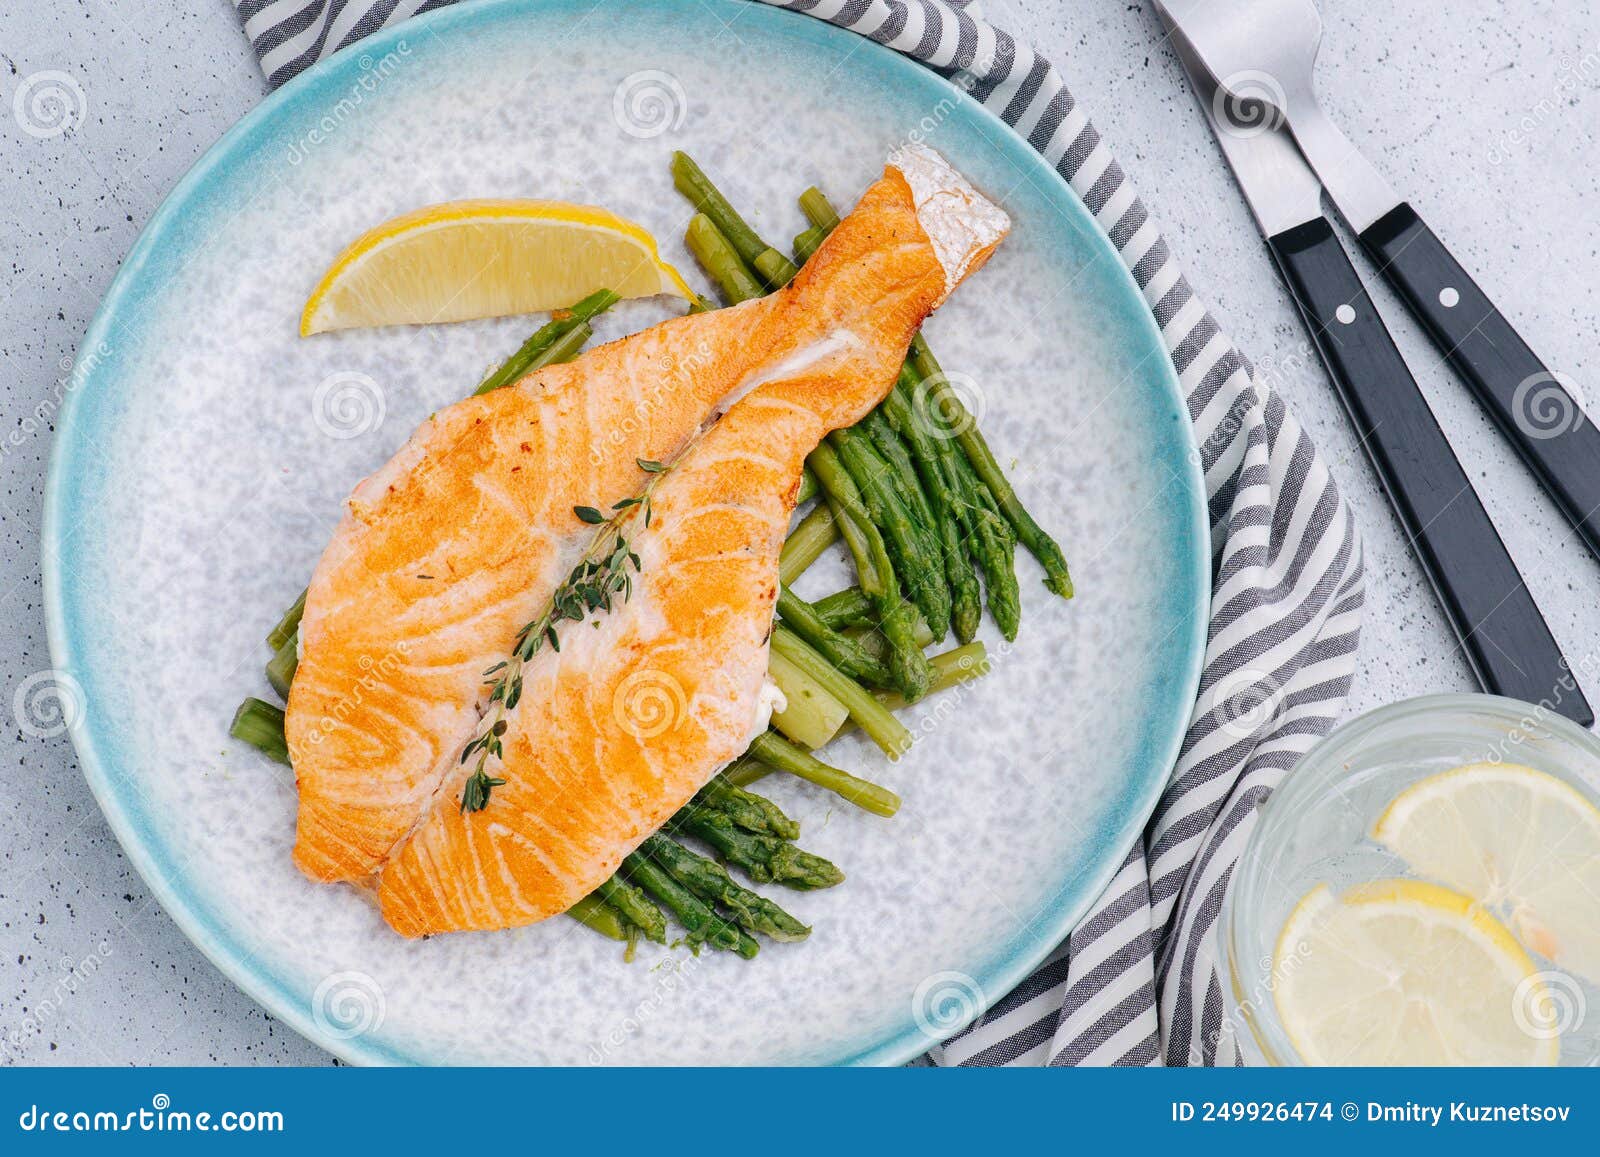 salmon placed on fried asparagus on a plate with lemon slice.